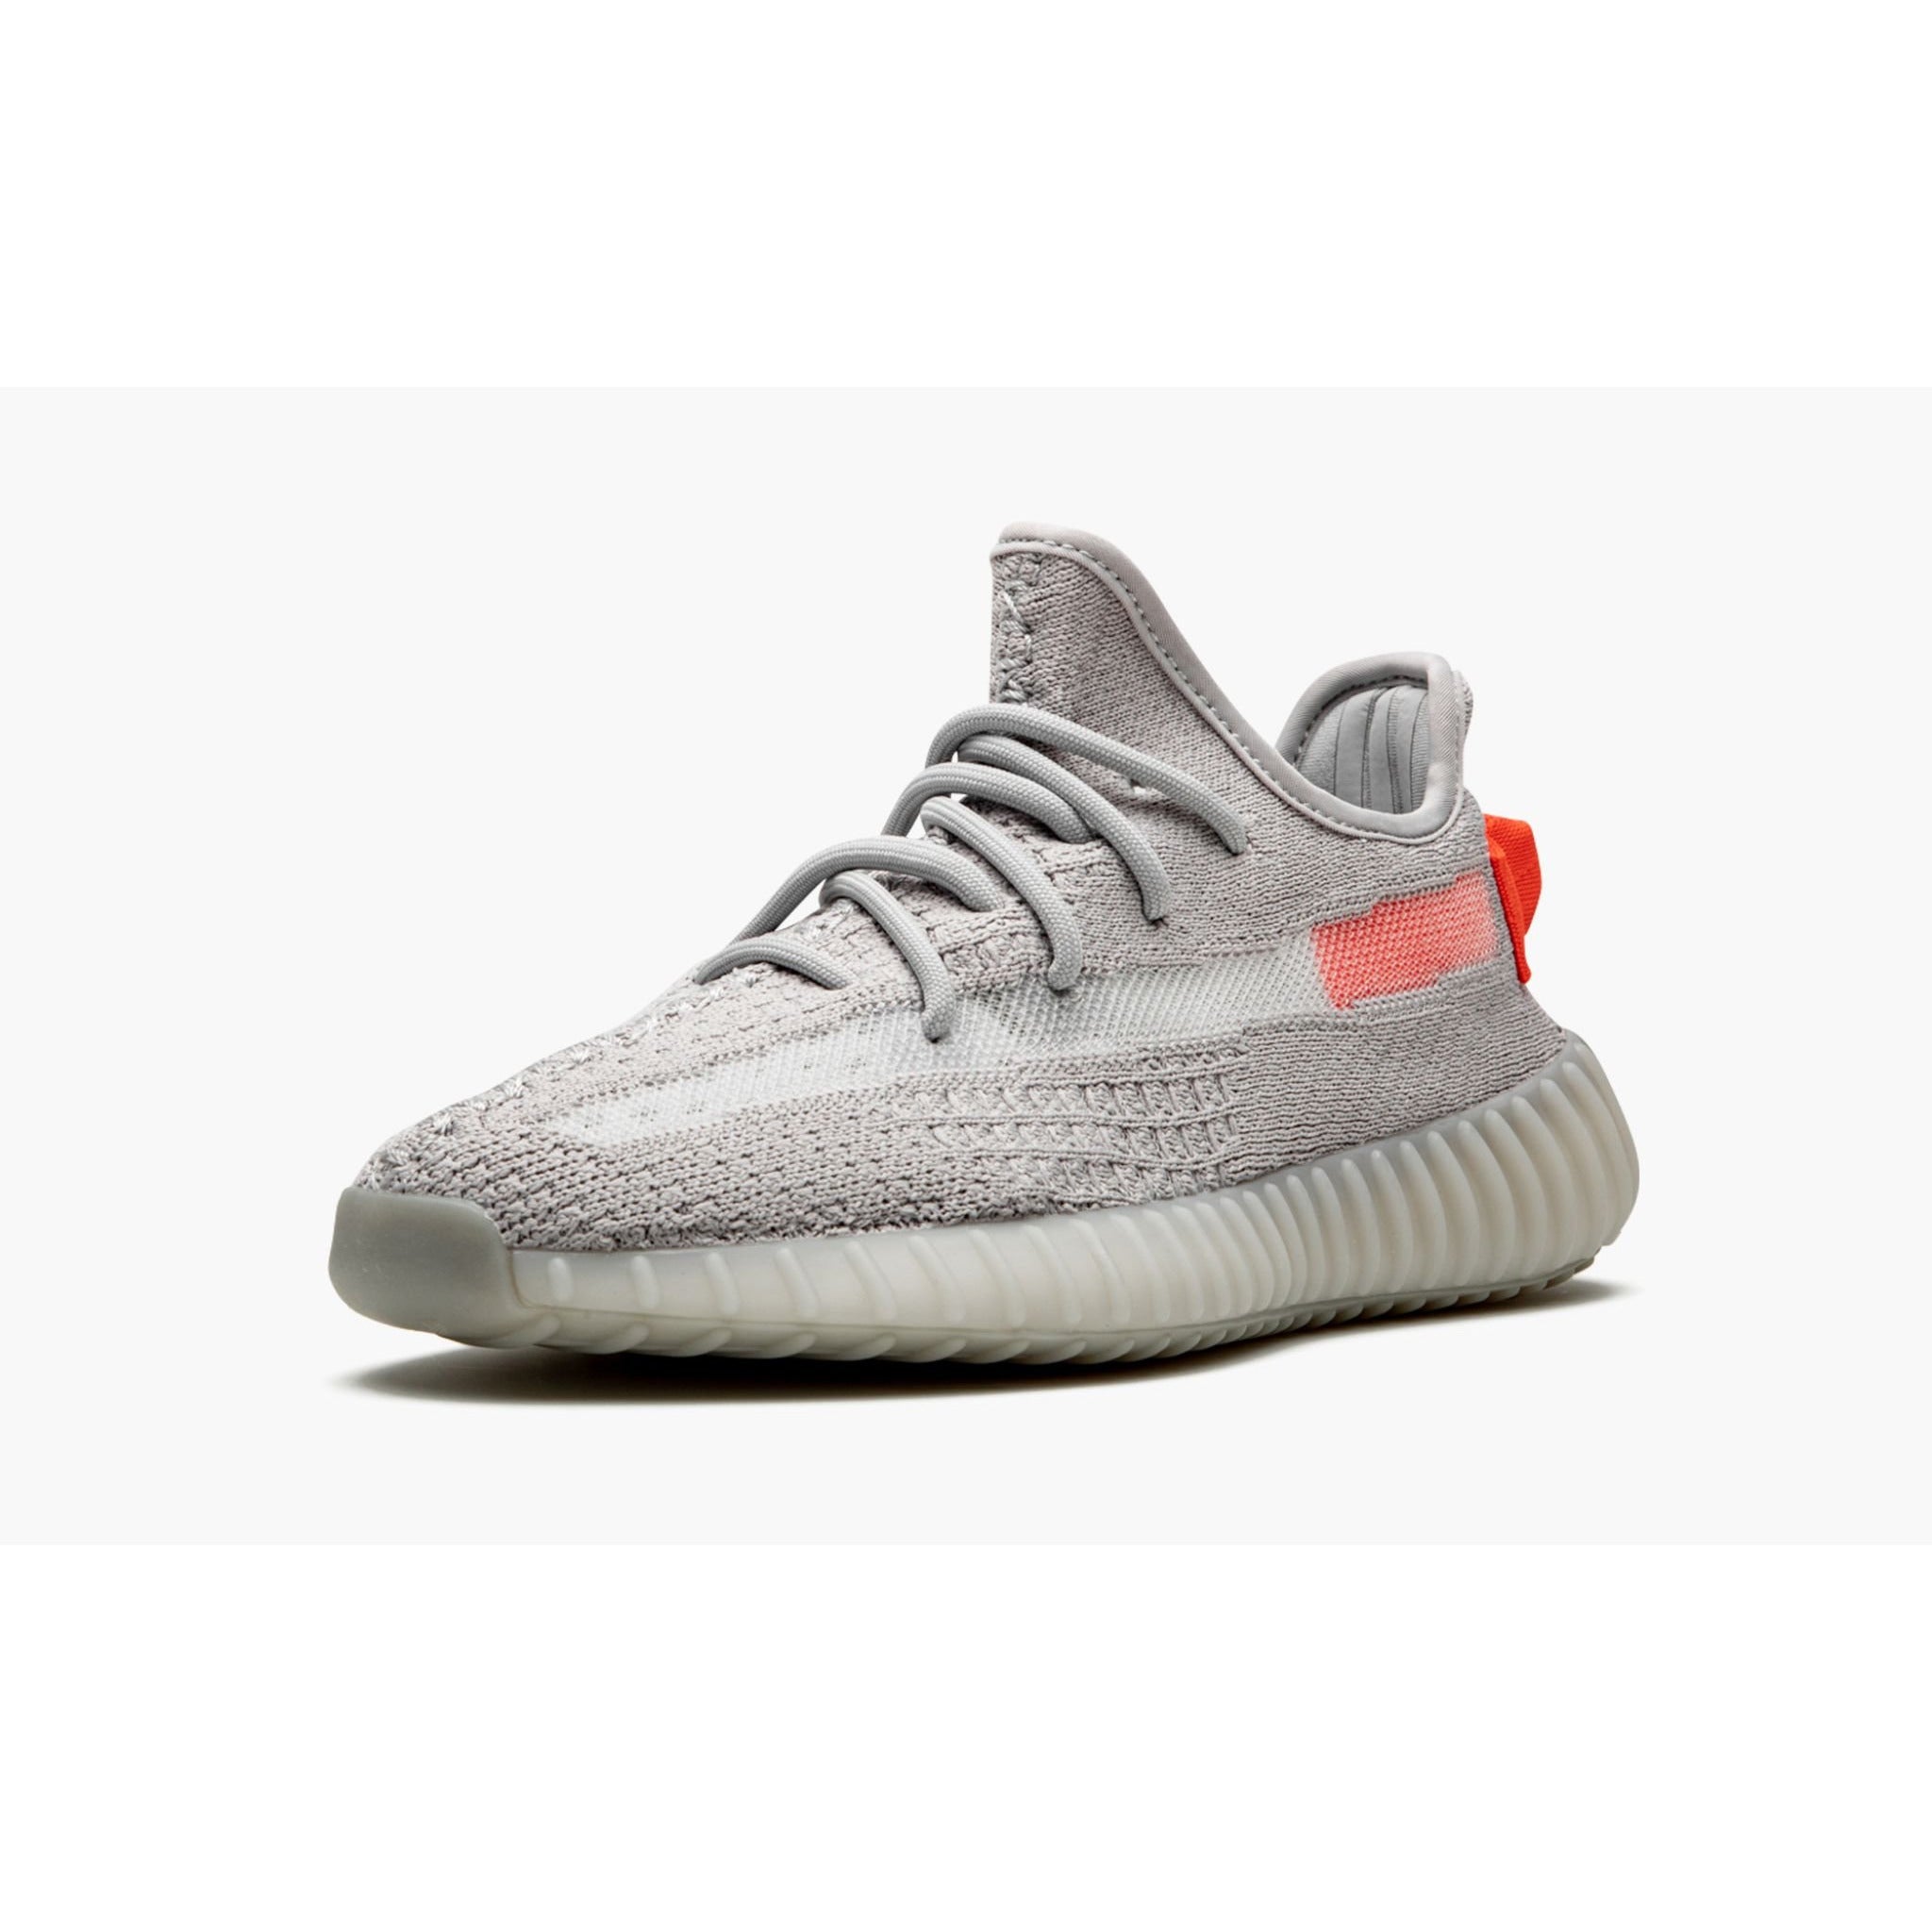 YEEZY BOOST 350 V2 "Tail Light" - Manore Store